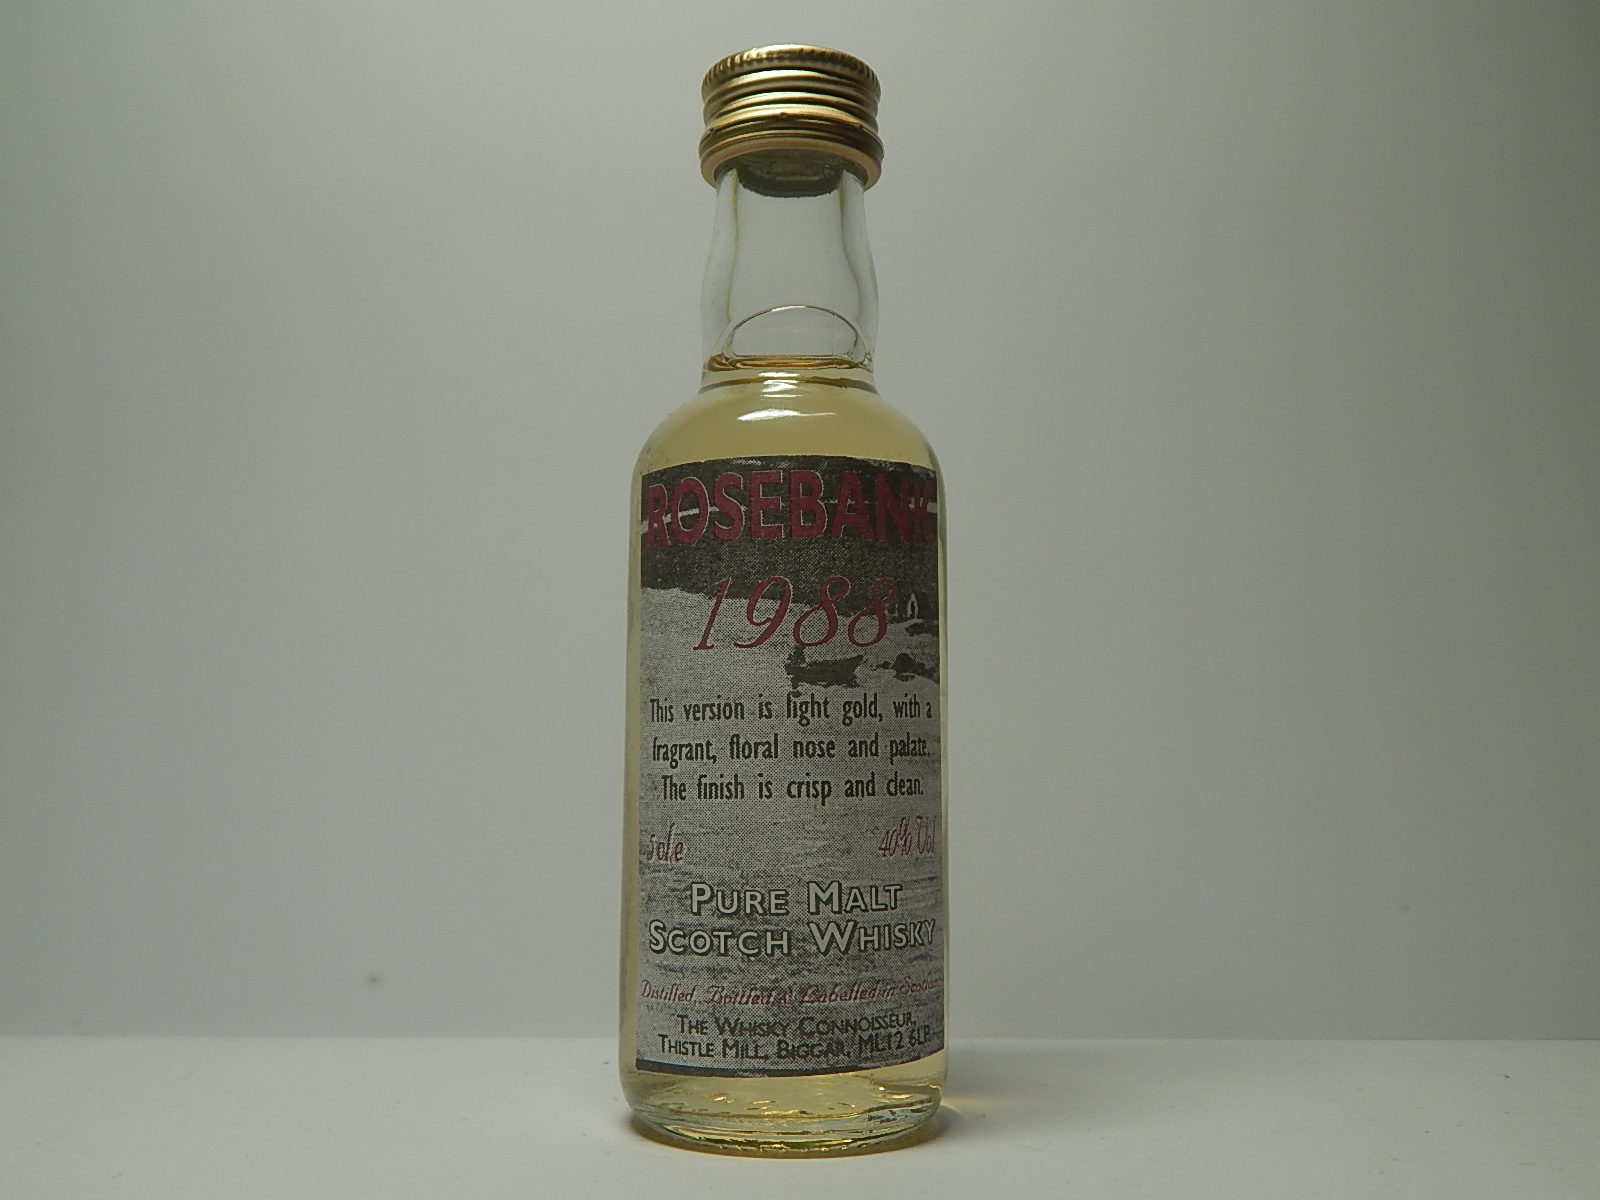 PMSW 1988 "Whisky Connoisseur" 5cle 40%Vol